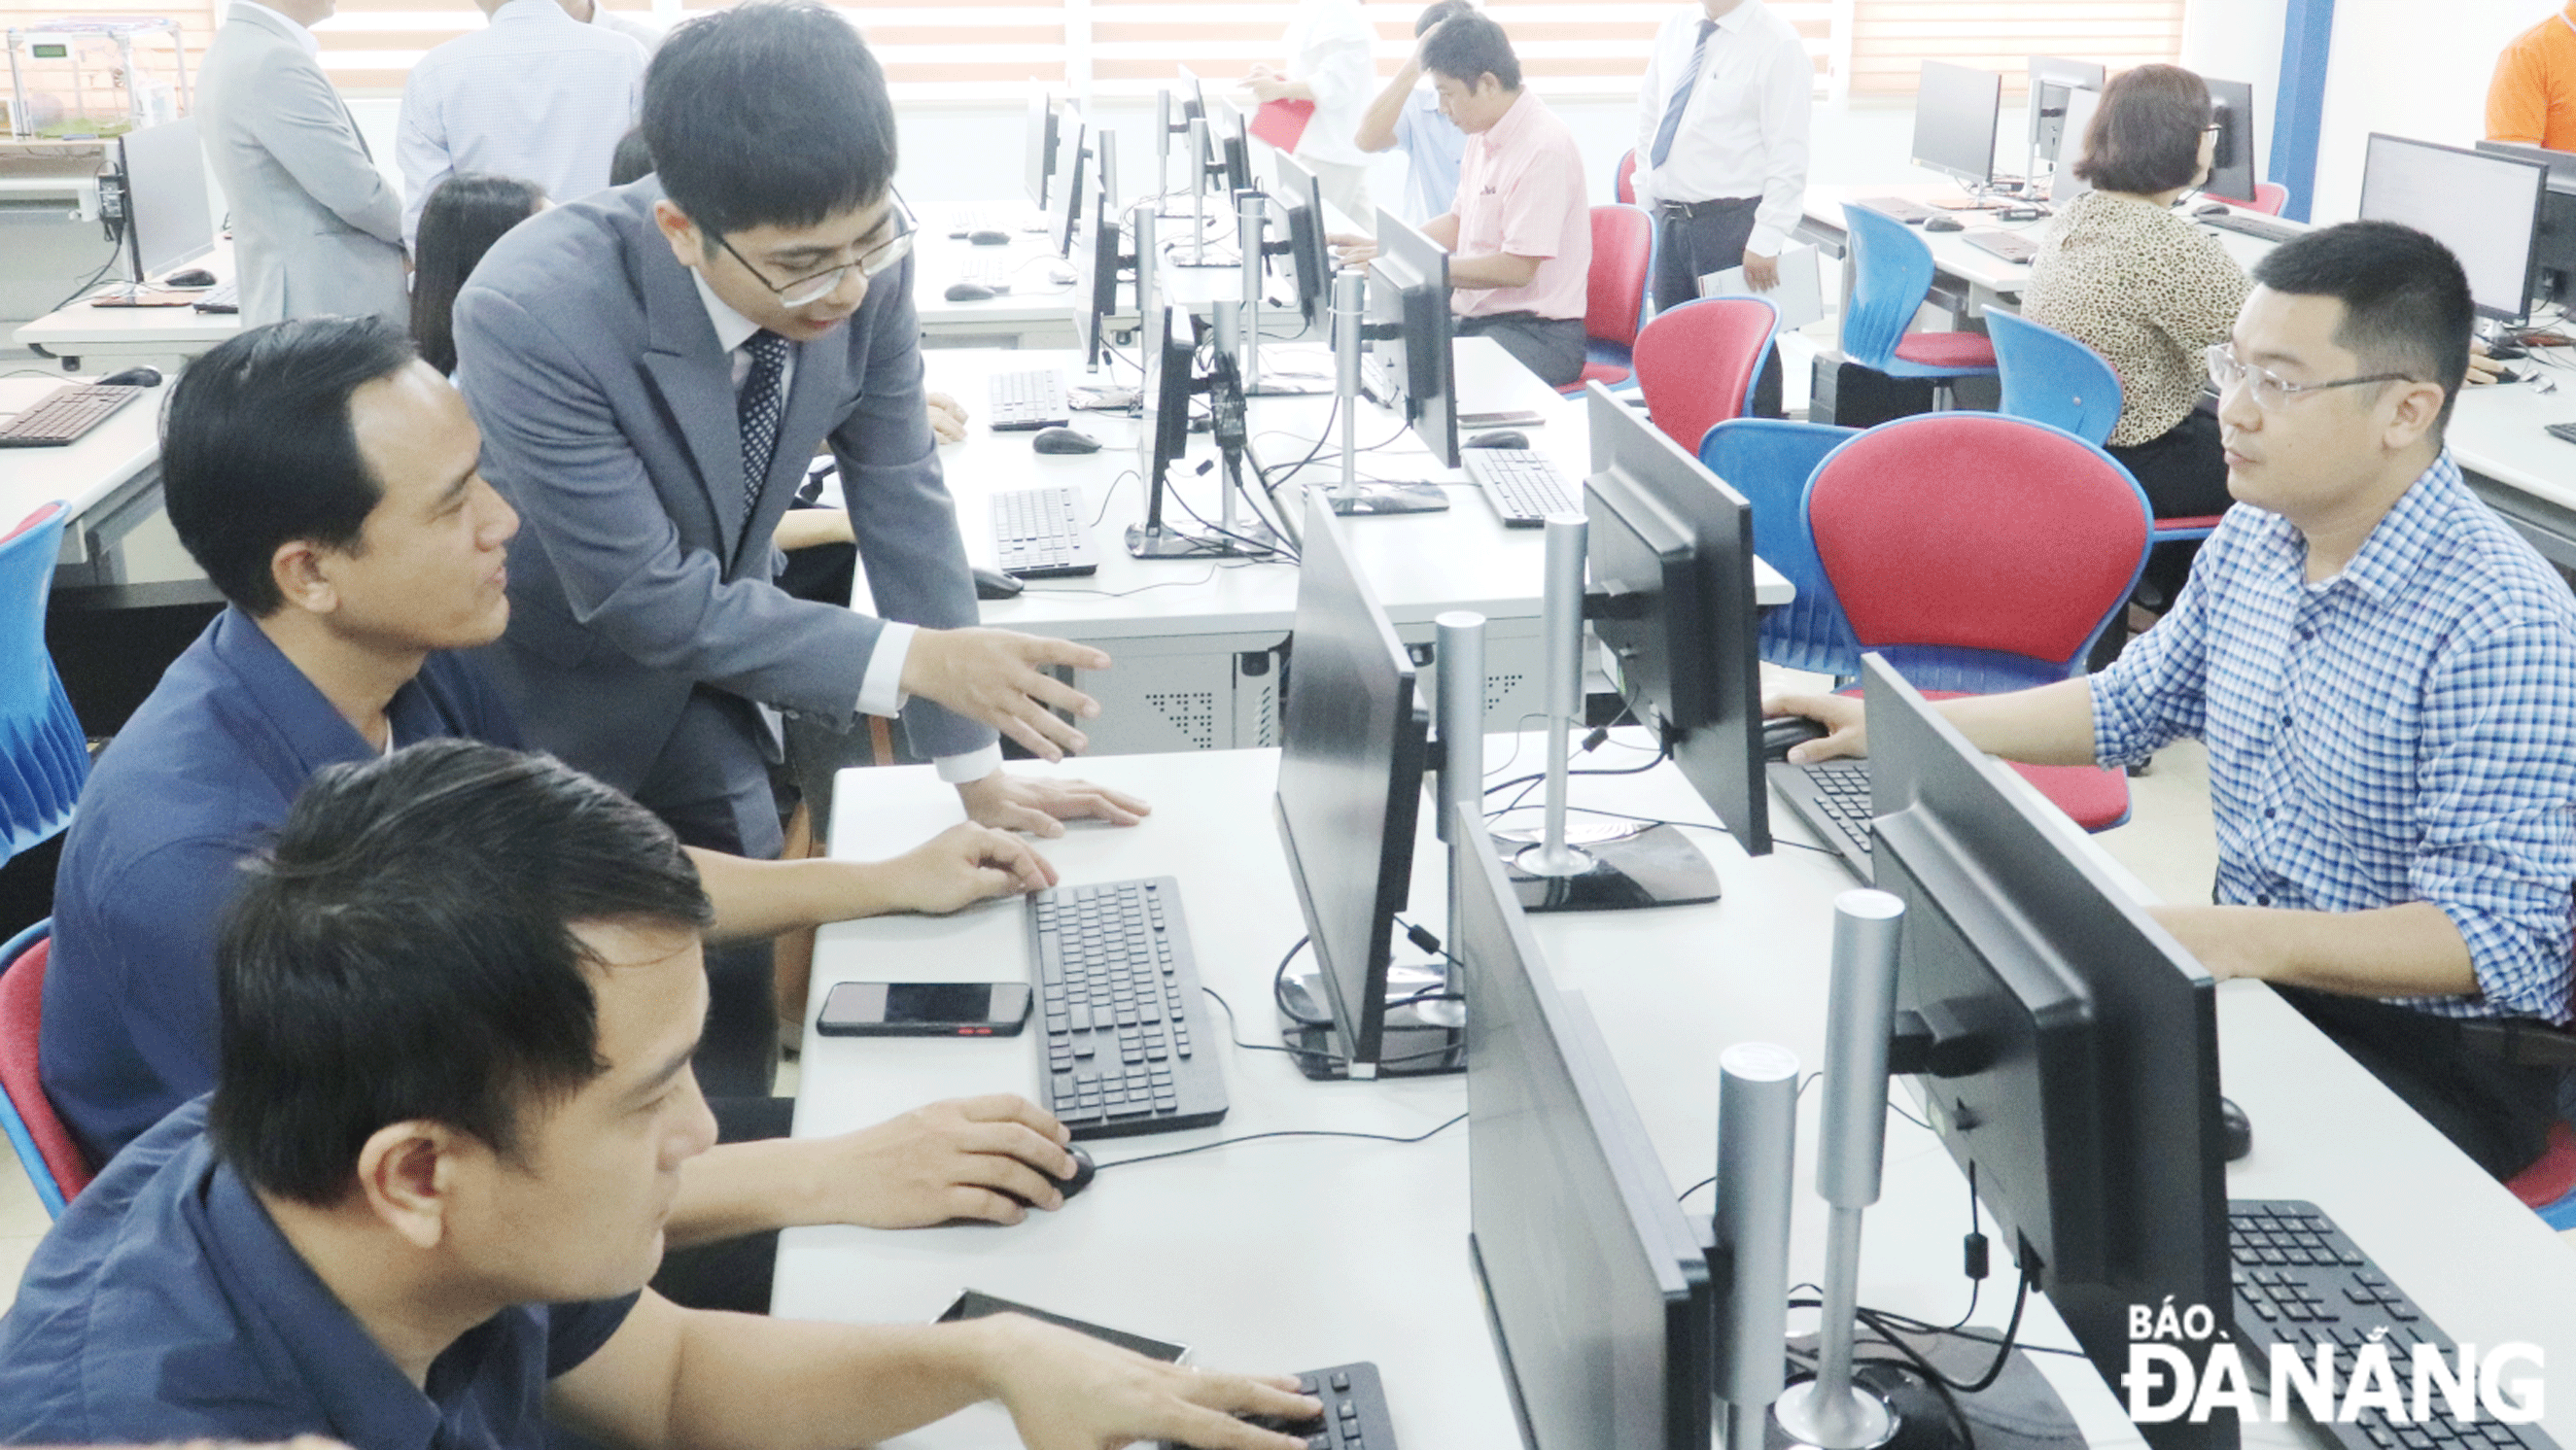 Lecturers participating in a programme on human resources training for integrated circuit (IC) design at the Viet Nam - Korea University of Information and Communications Technology in Da Nang. Photo: NGOC HA